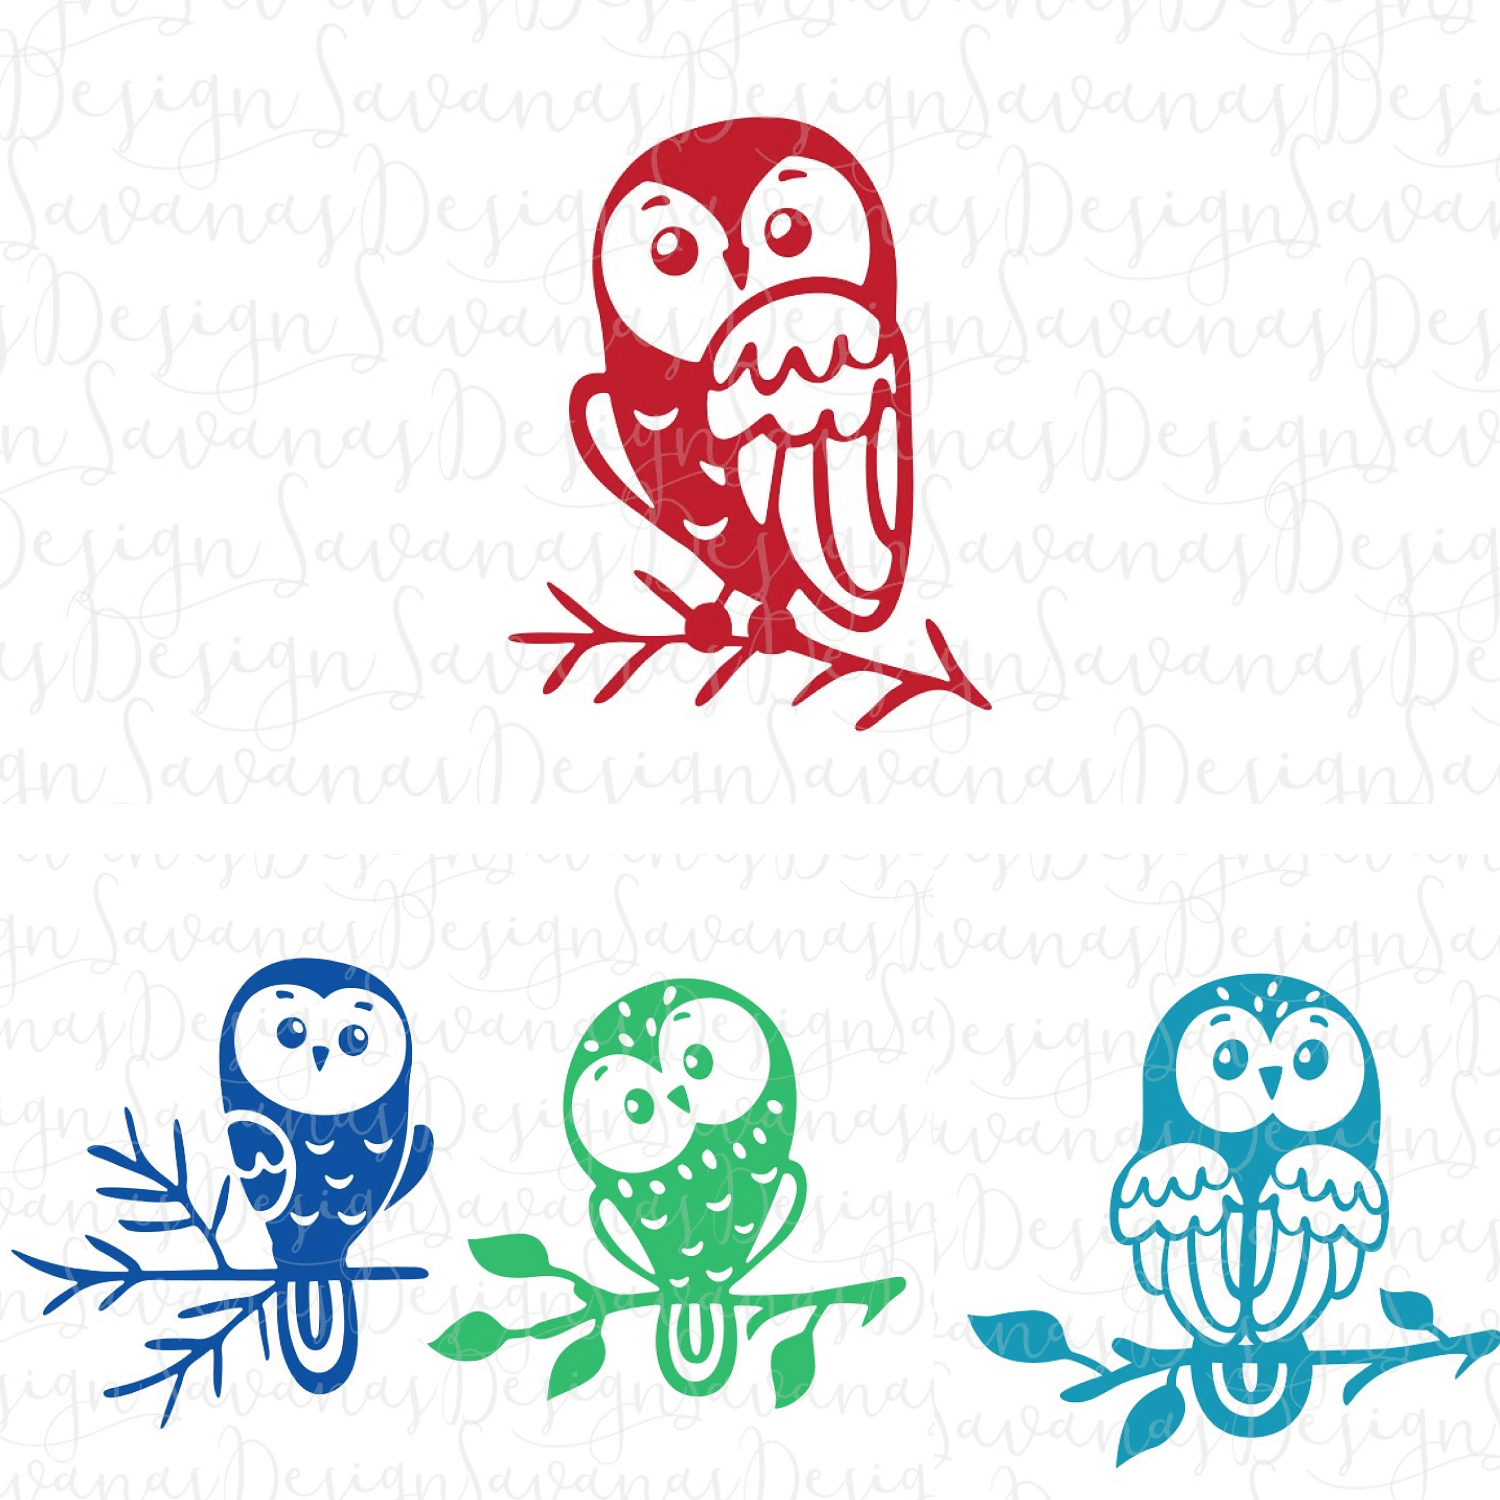 Three owls sitting on a branch with leaves.